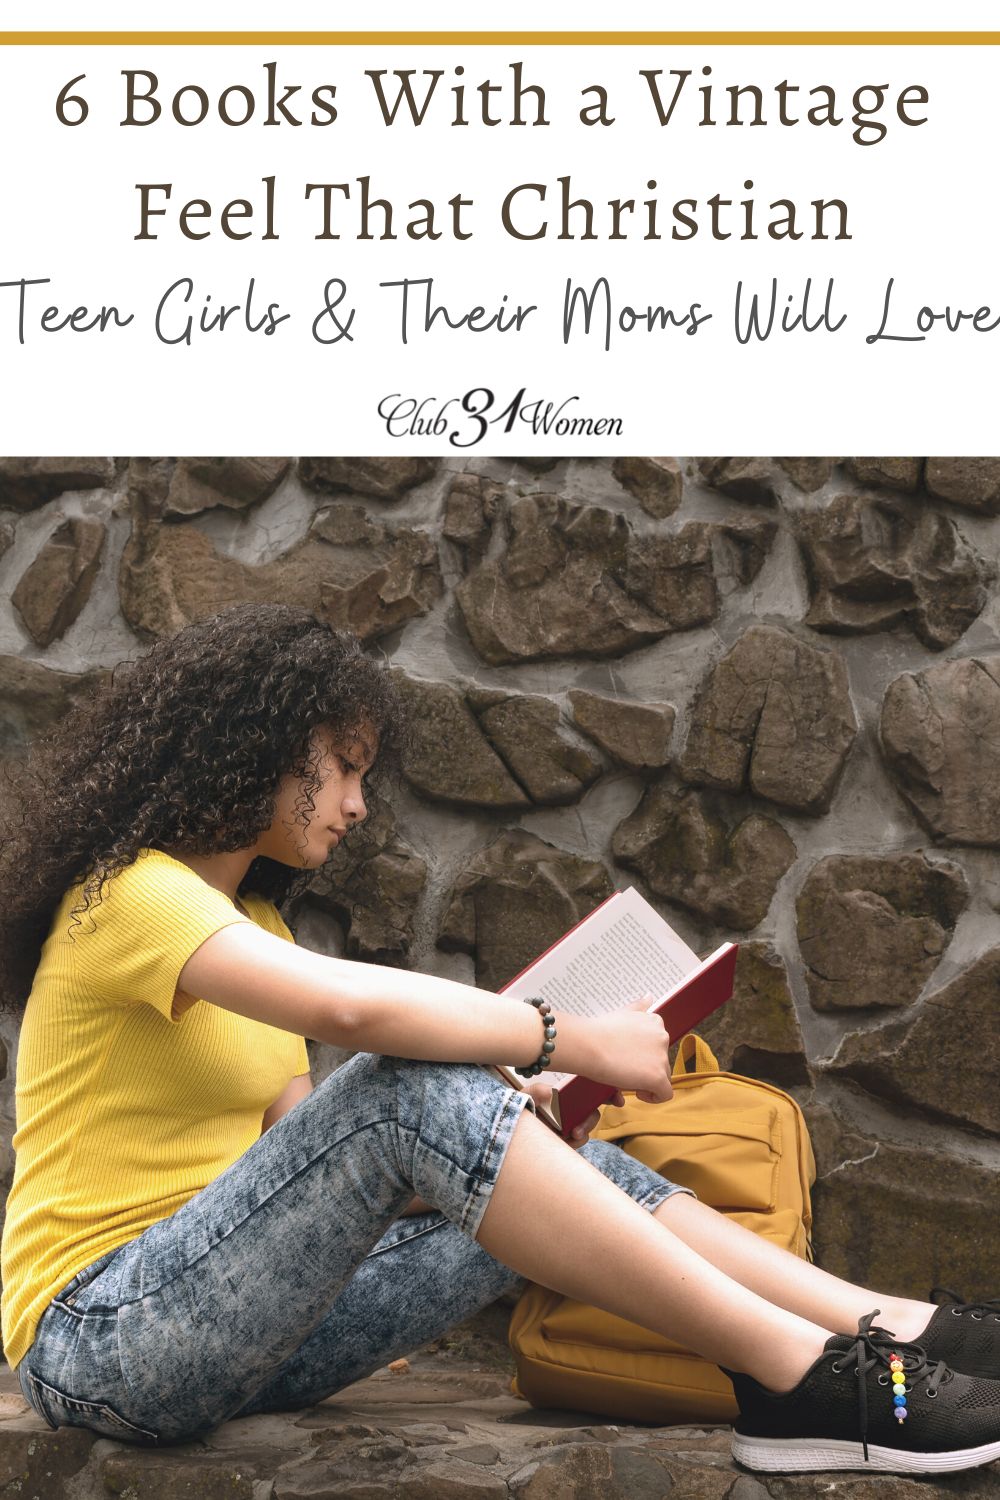 Is your teen girl into old-fashioned fiction that she can't get enough of? Here are some vintage feel titles she's sure to love. via @Club31Women